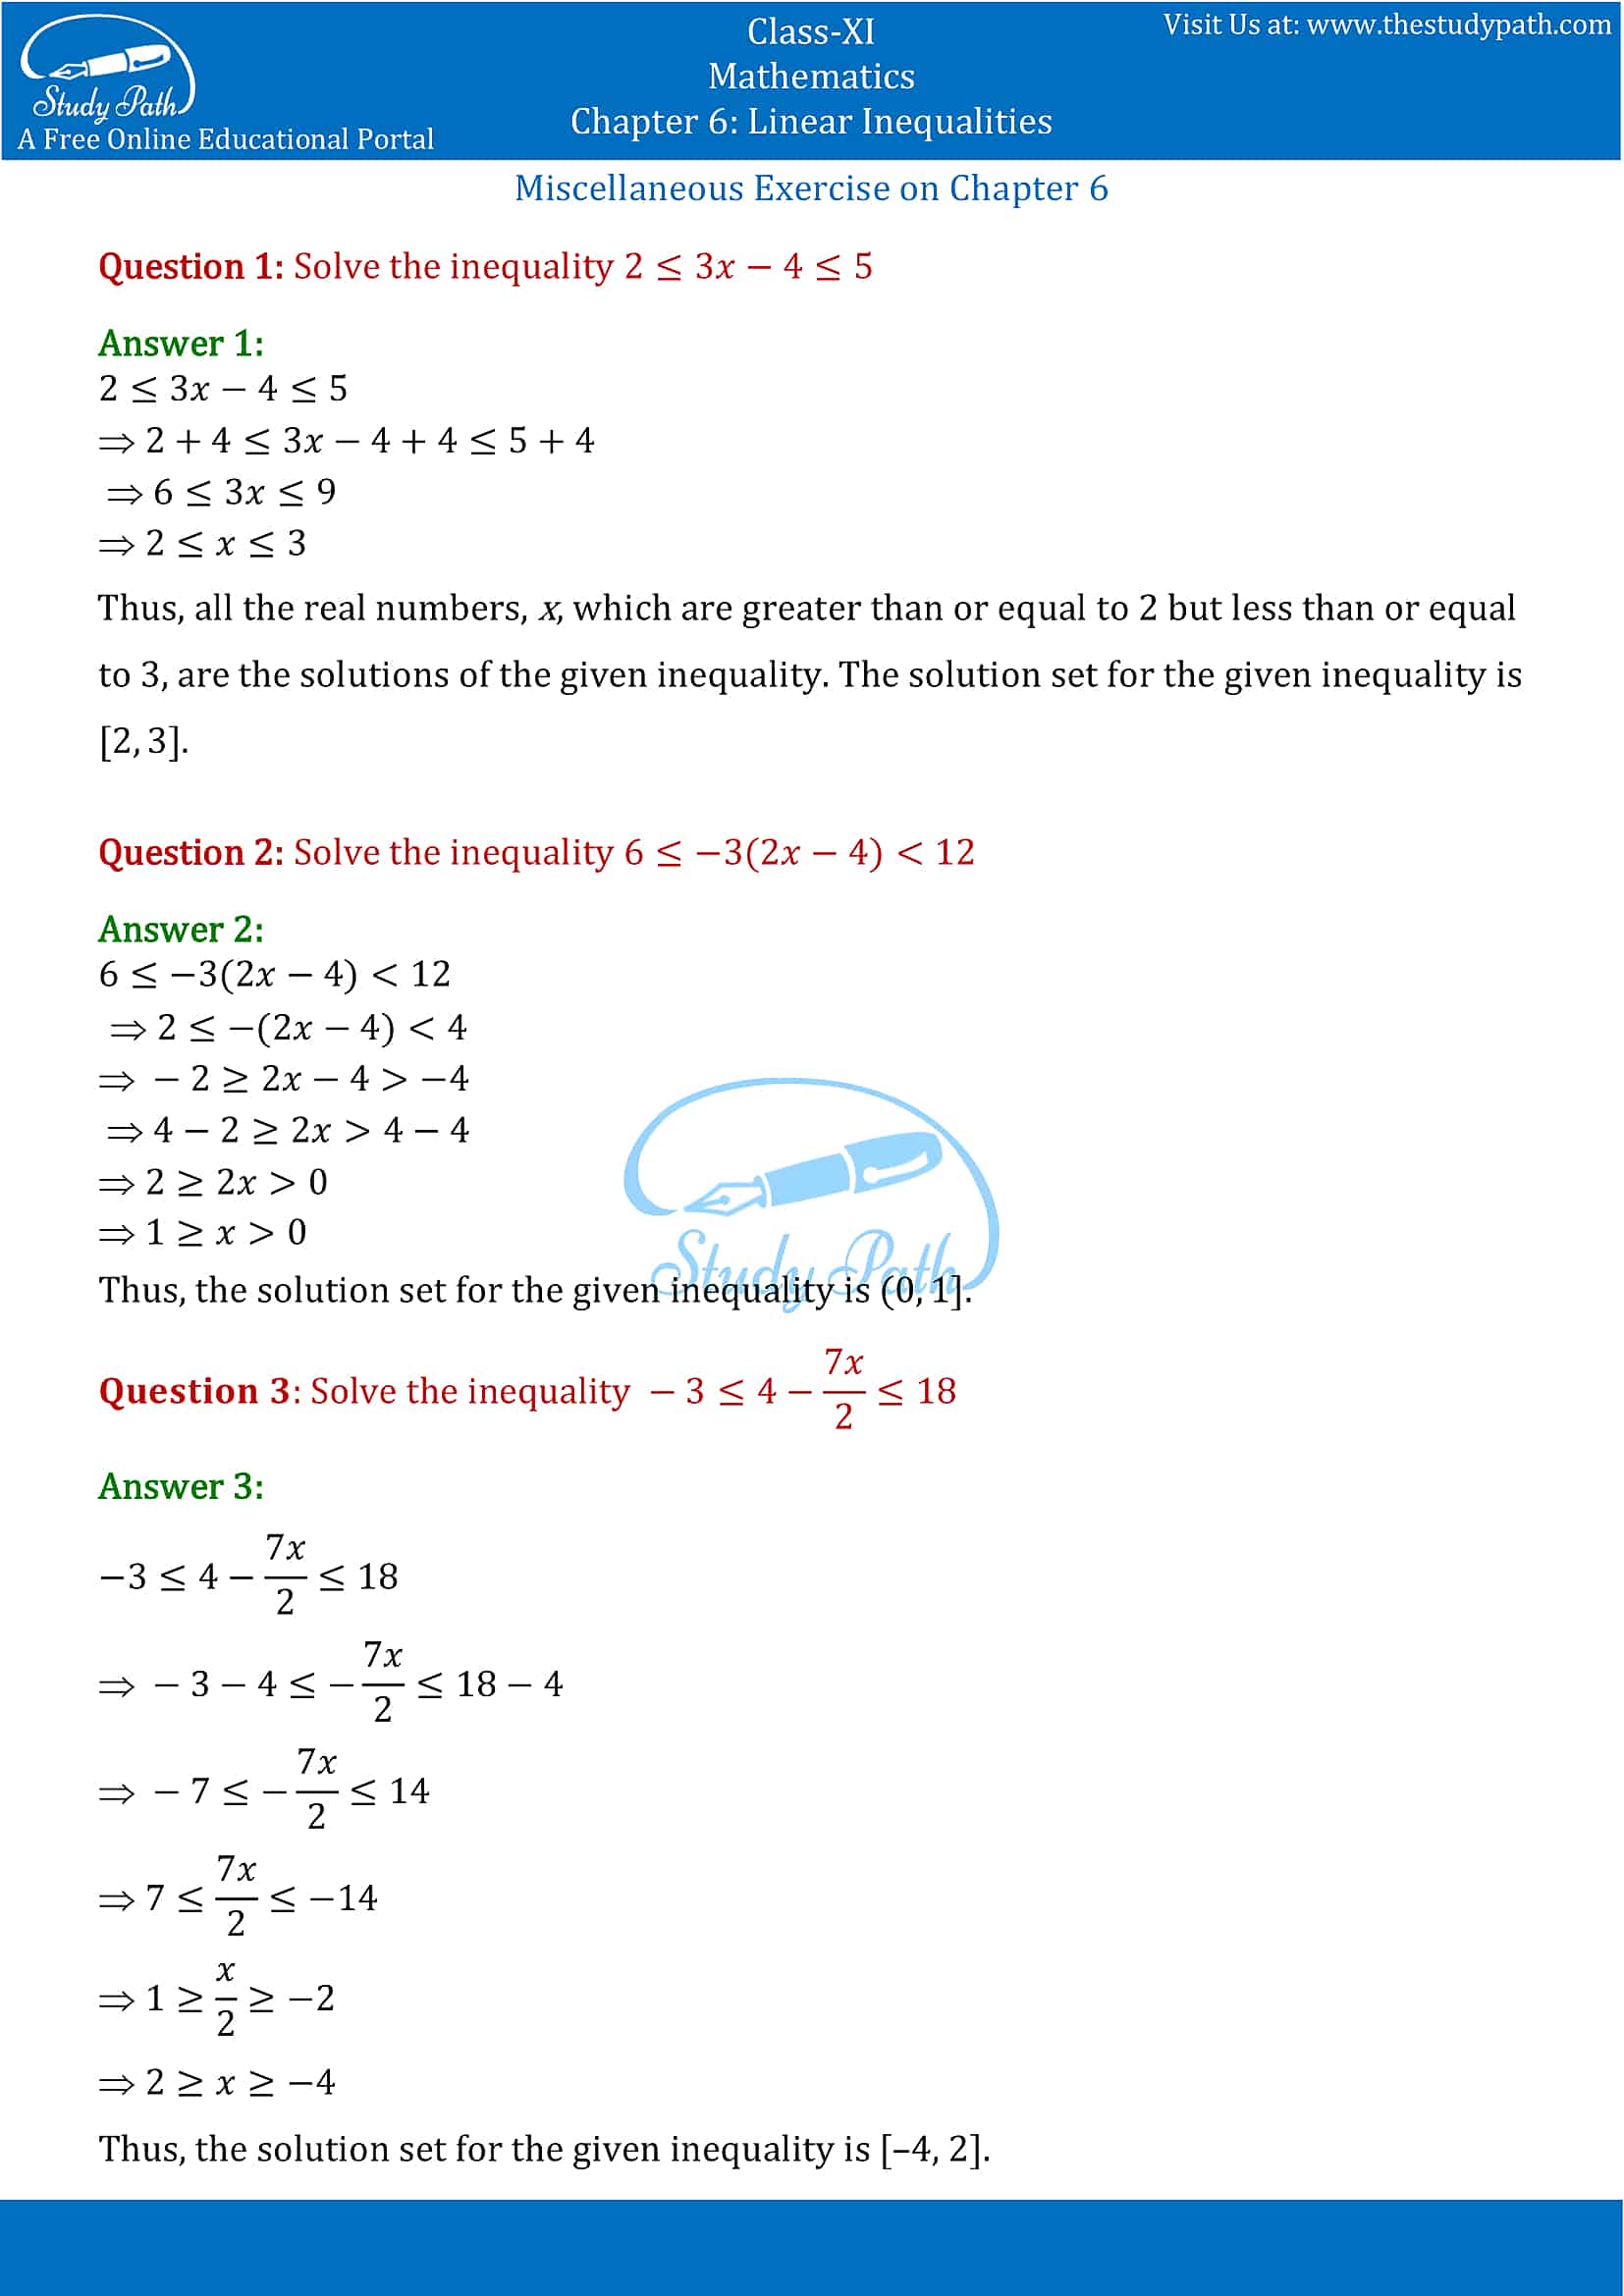 NCERT Solutions for Class 11 Maths chapter 6 Linear Inequalities Miscellaneous Exercise Part-1